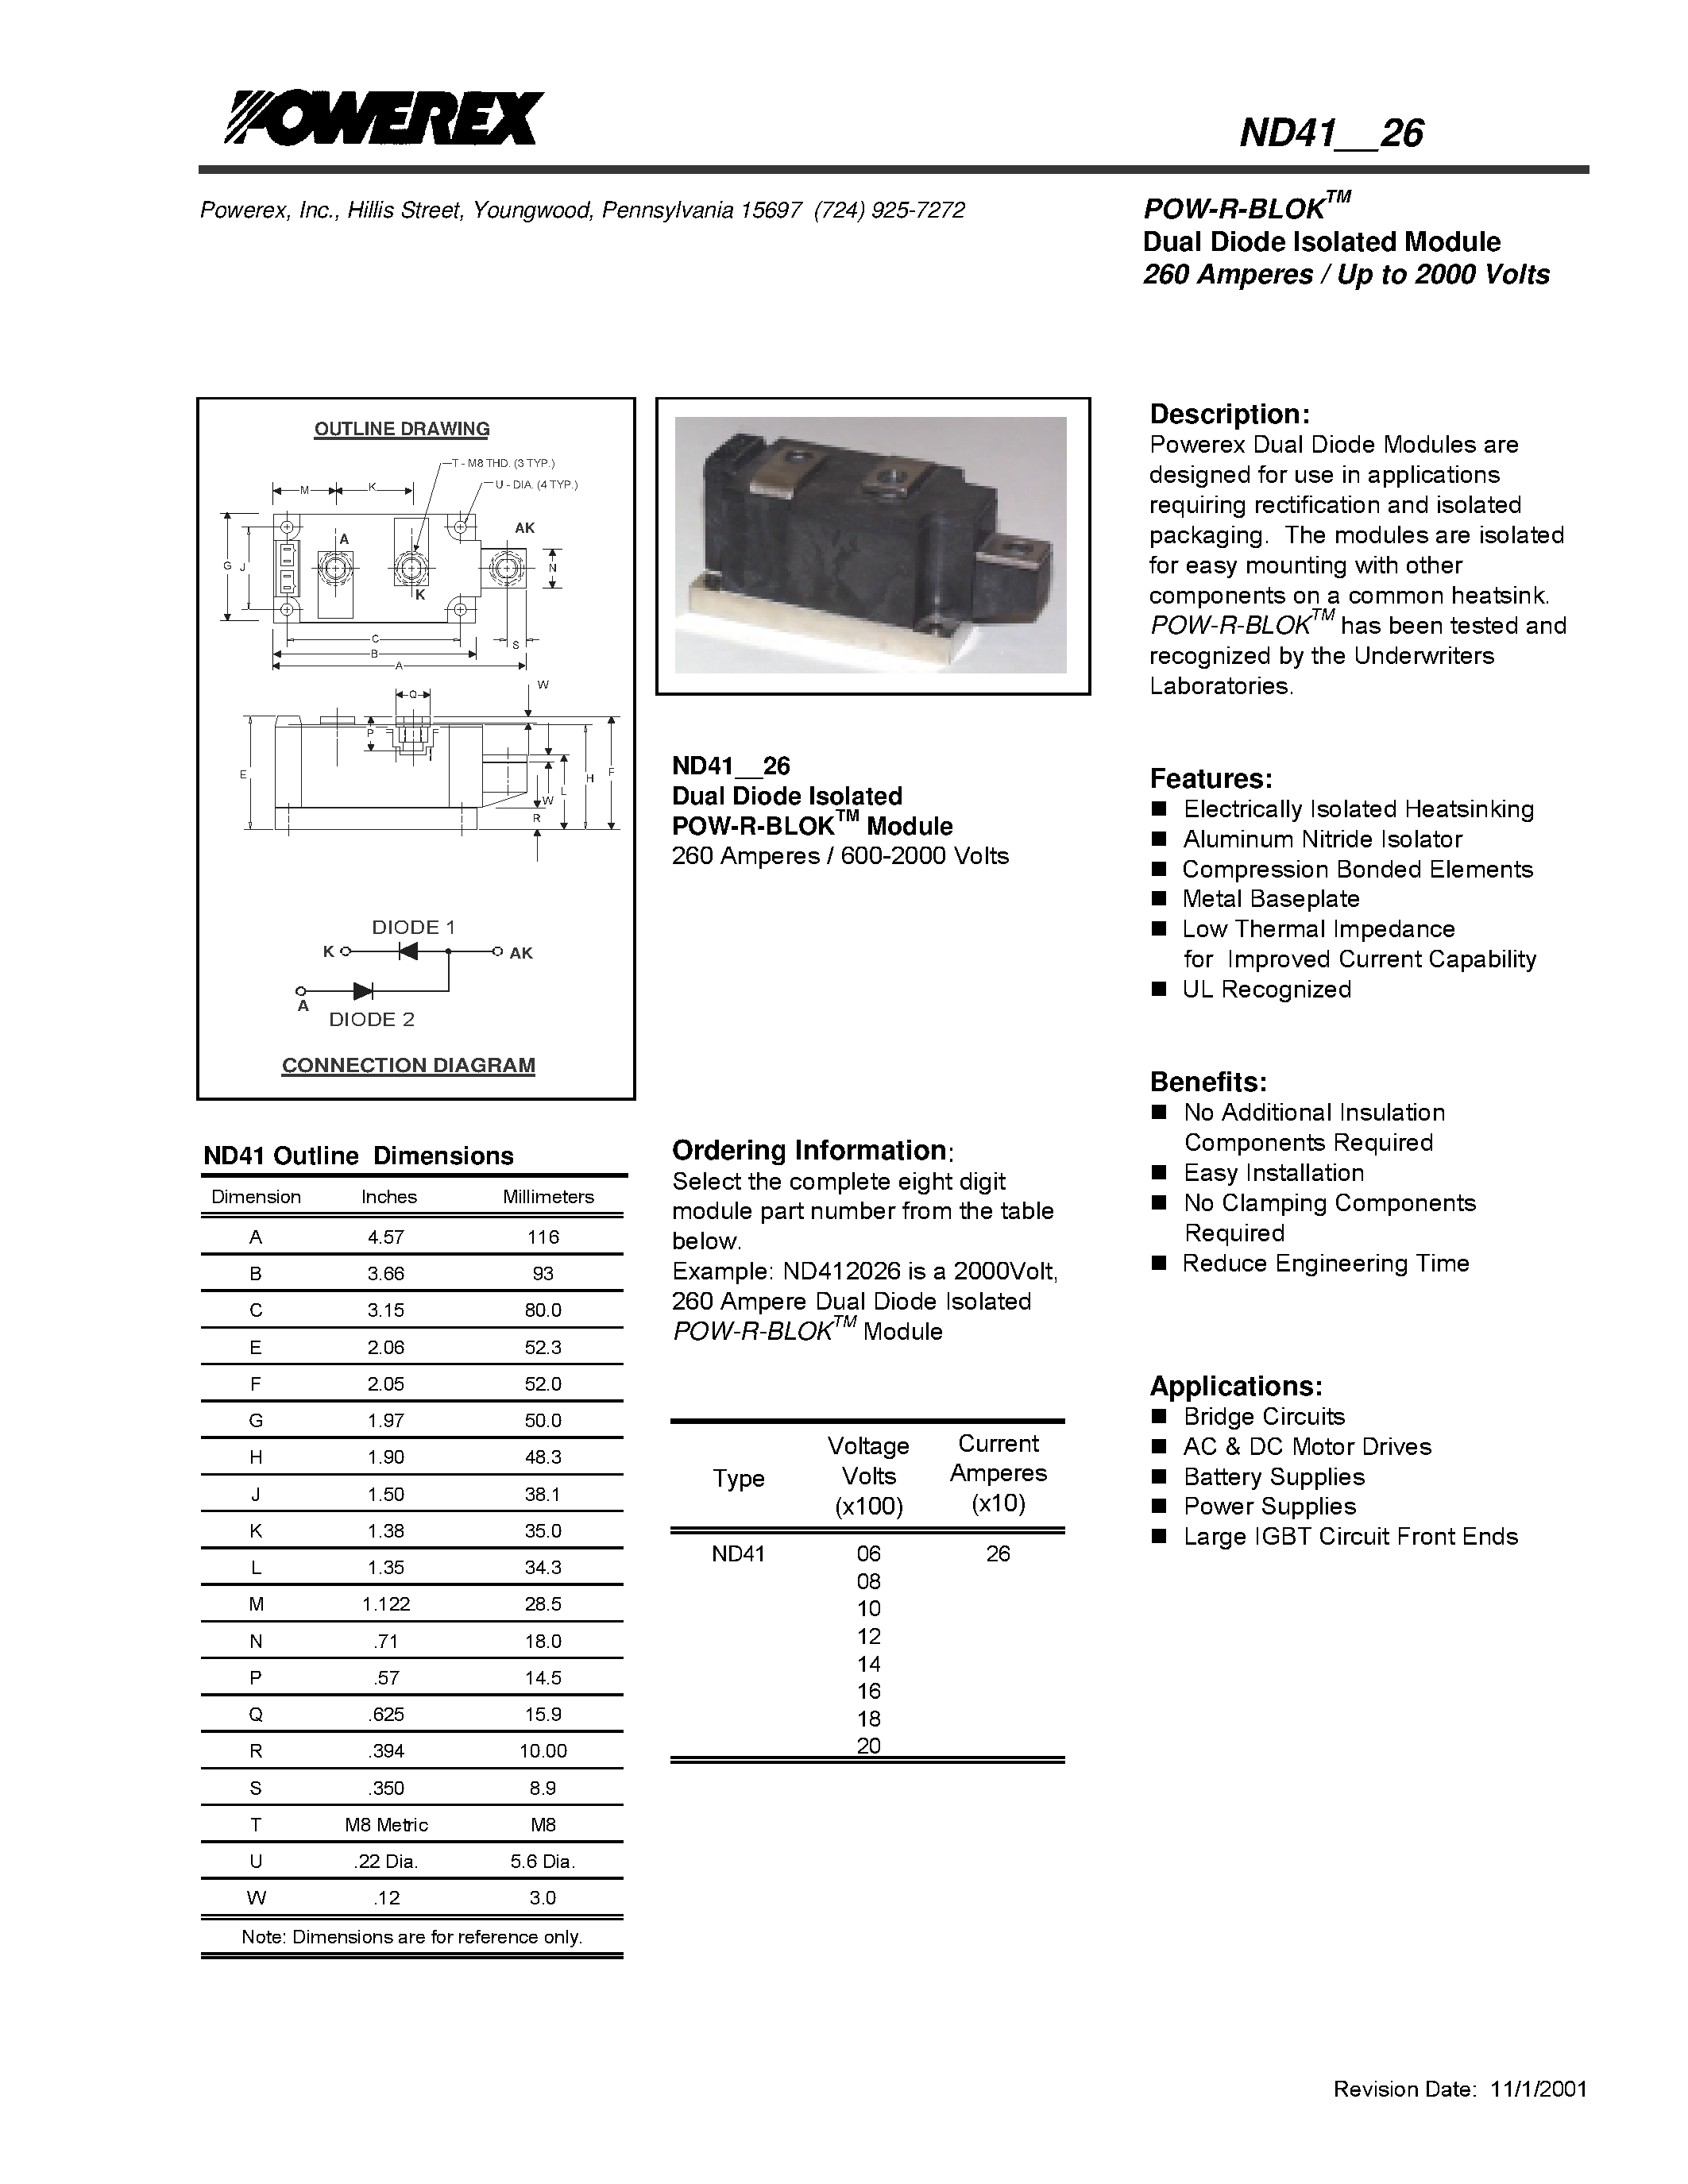 Datasheet ND412026 - POW-R-BLOK Dual Diode Isolated Module (260 Amperes / Up to 2000 Volts) page 1